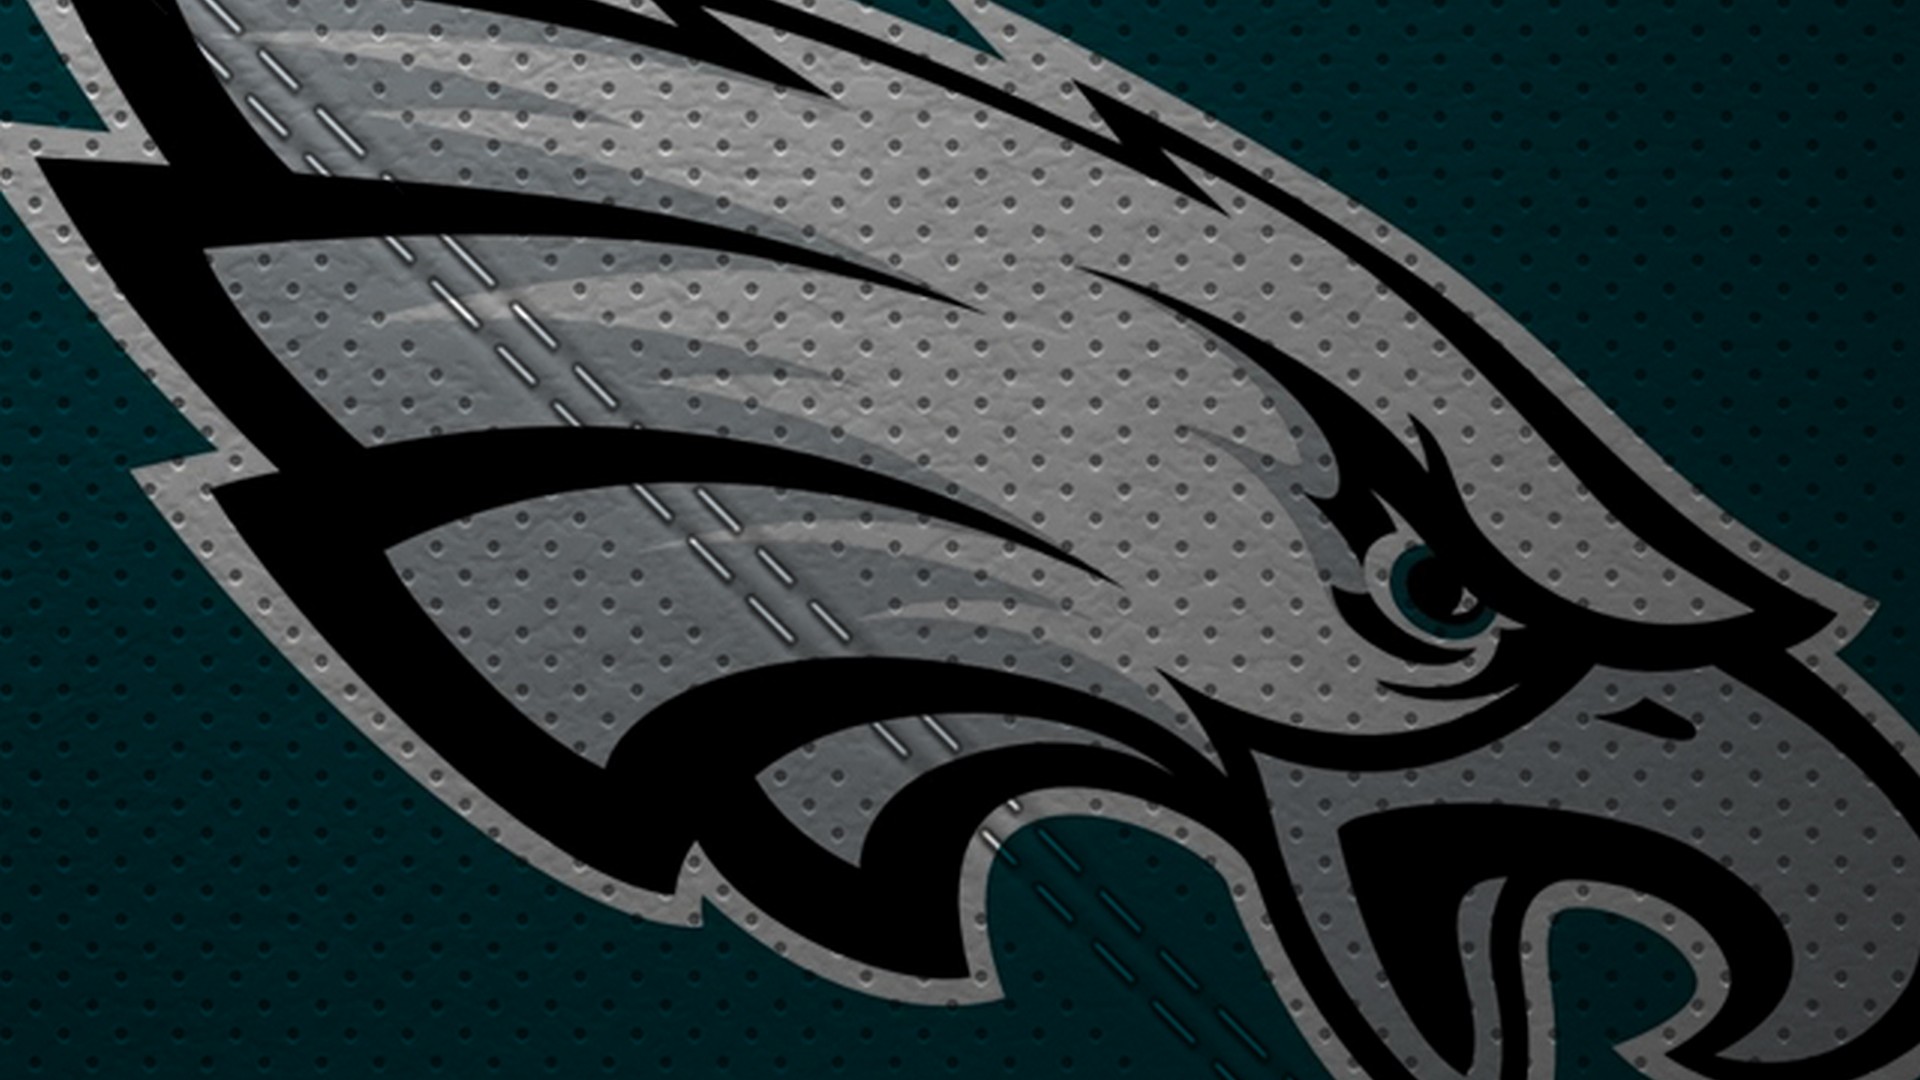 The Eagles Wallpaper HD with resolution 1920x1080 pixel. You can make this wallpaper for your Mac or Windows Desktop Background, iPhone, Android or Tablet and another Smartphone device